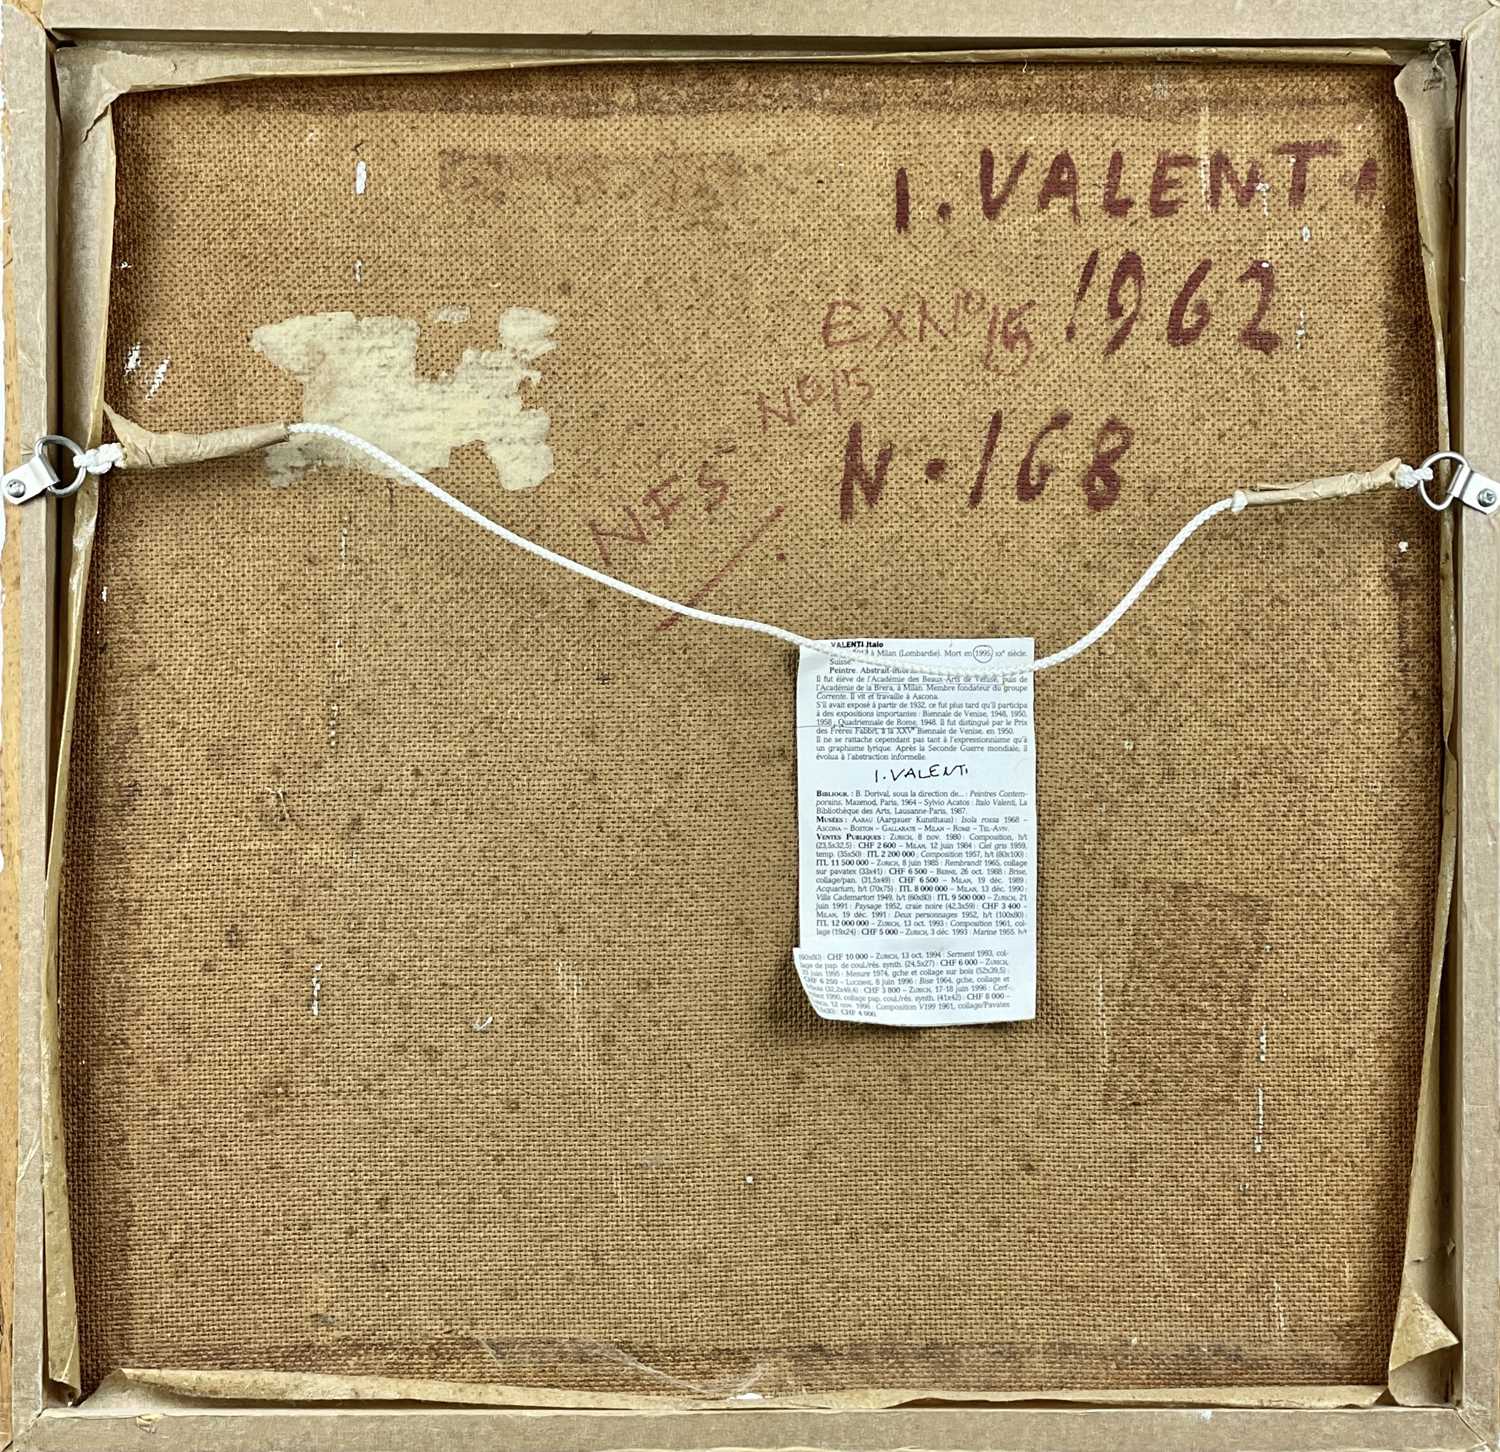 Italo VALENTI (1912-1995) Untitled (No.168) Mixed media and collage Signed, inscribed and dated 1962 - Image 3 of 3